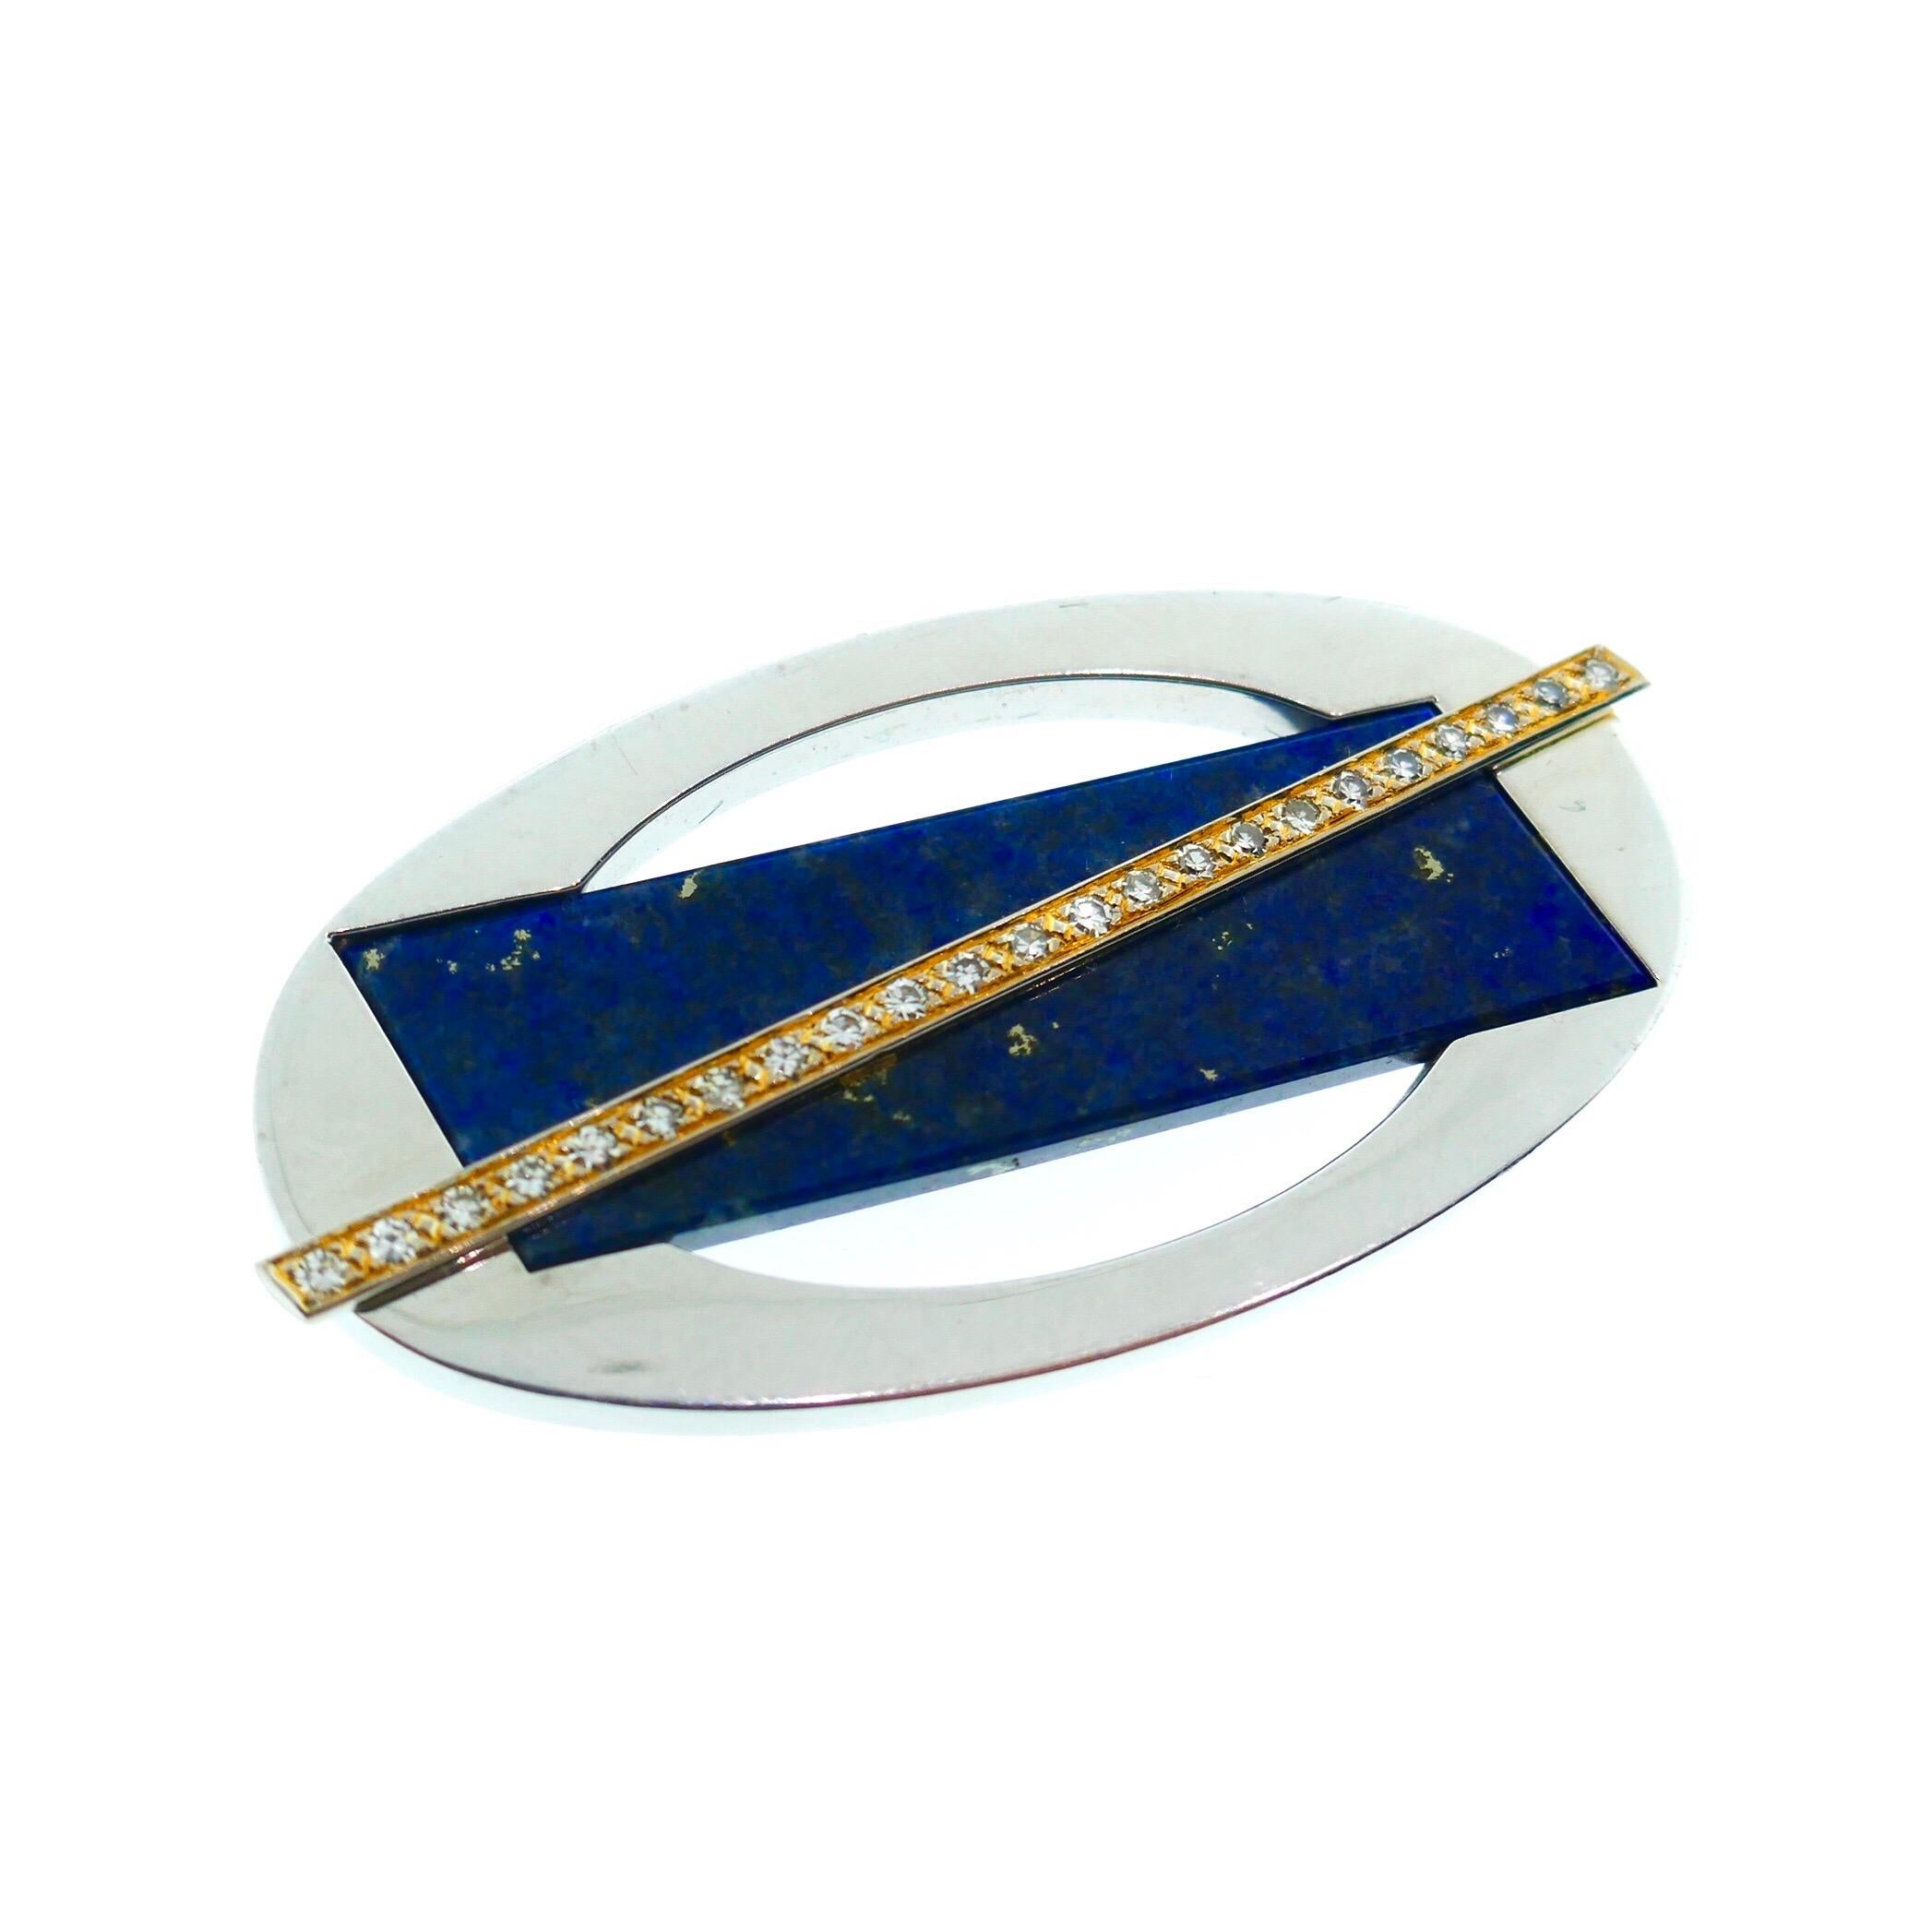 Cartier 18K Yellow and White Gold, Diamond, and Lapis Brooch with Original Box 

This is an absolutely stunning vintage Cartier brooch with the original box. The brooch features a classic modernist motif in amazing detail. There is almost one carat